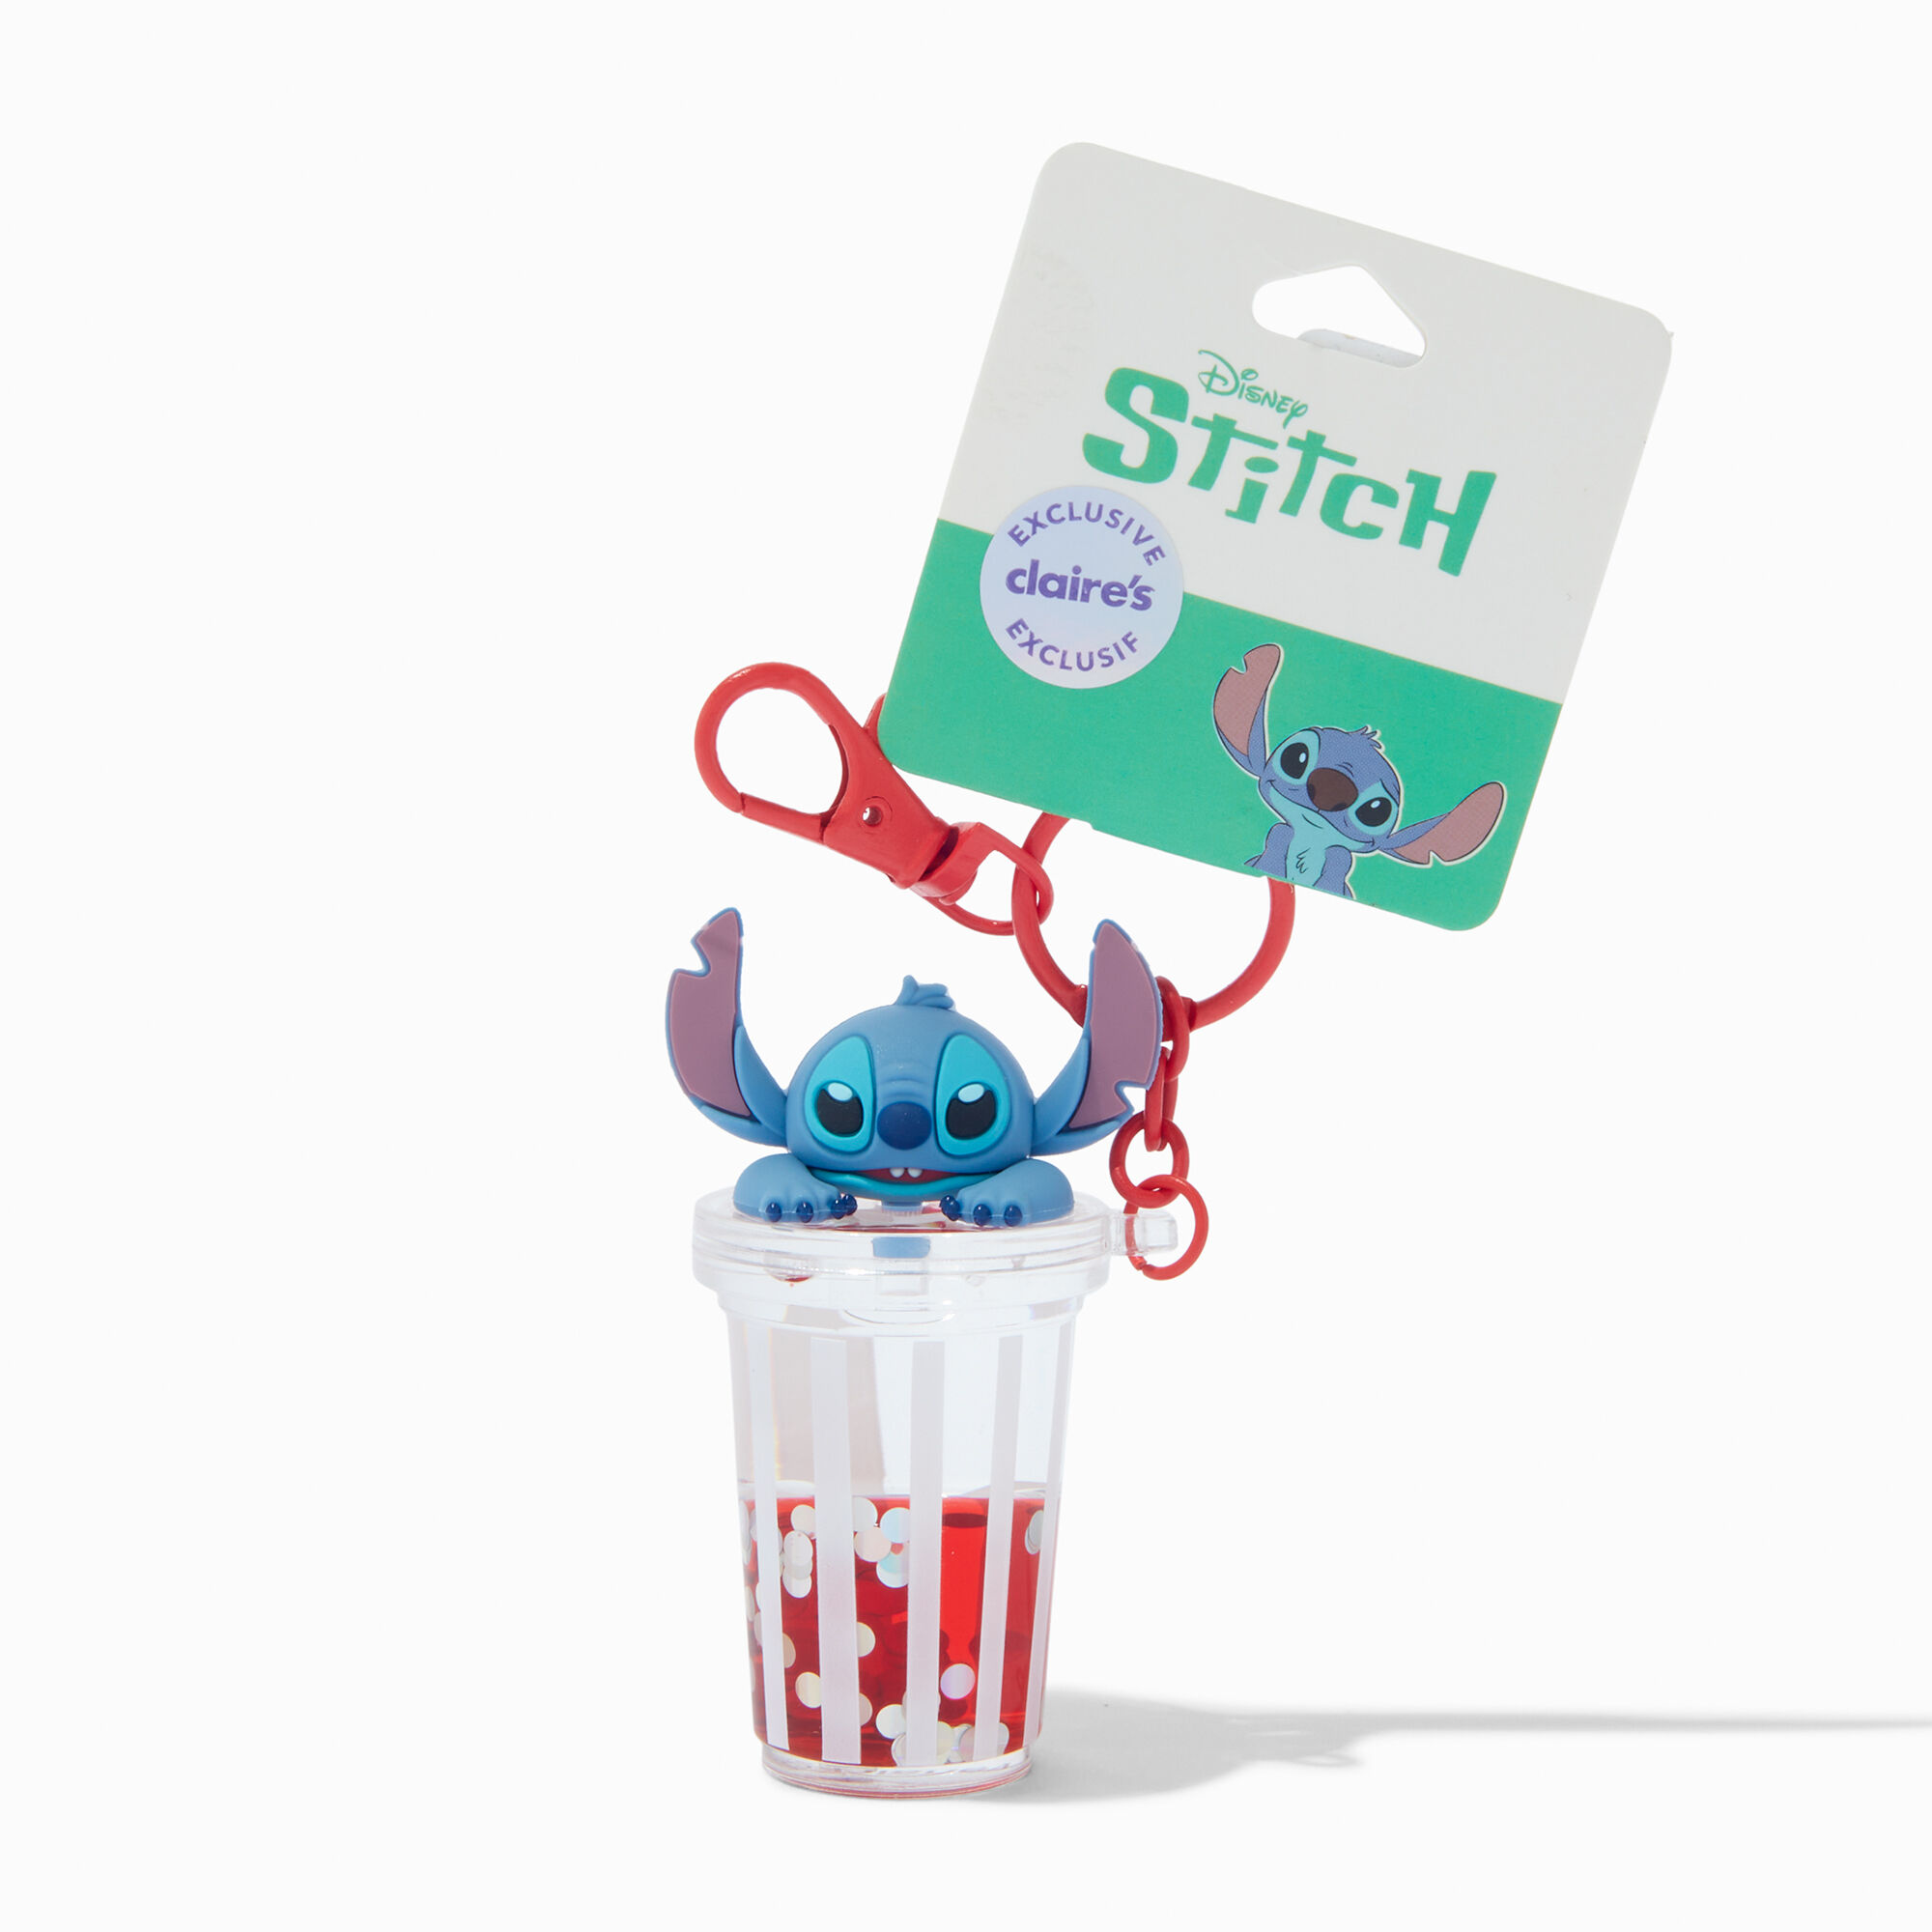 View Disney Stitch Claires Exclusive WaterFilled Popcorn Keyring information